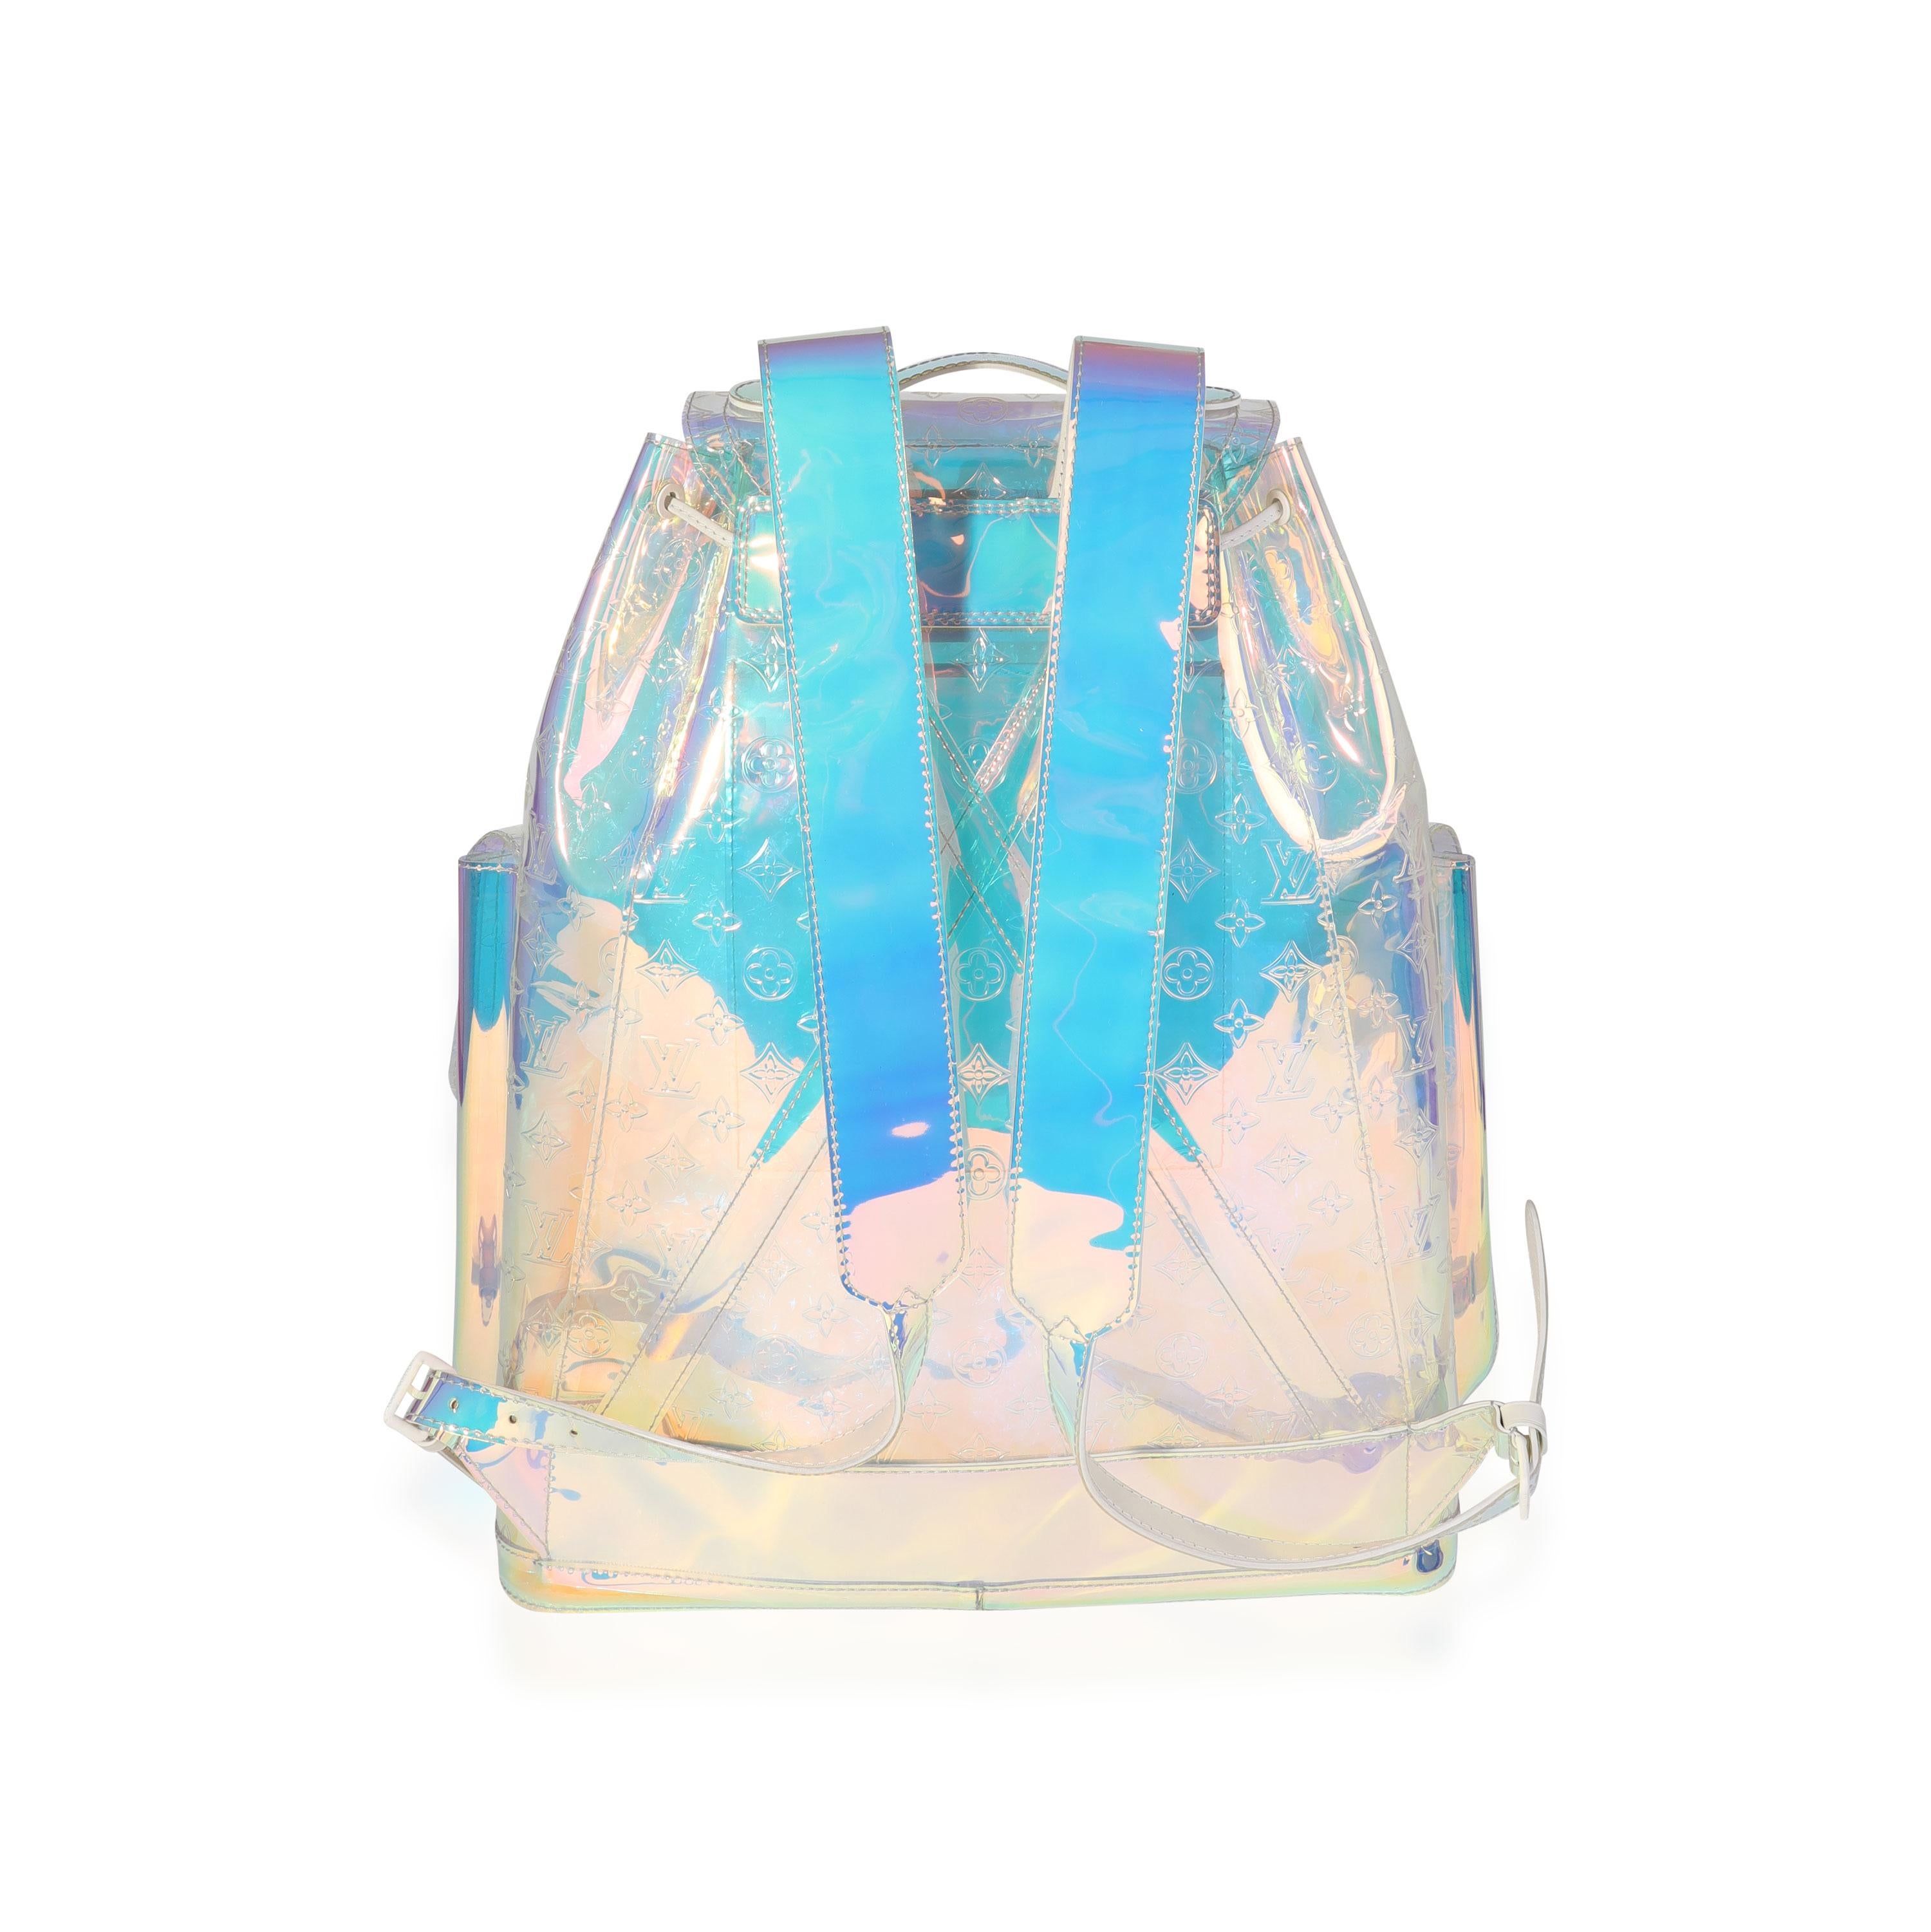 Listing Title: Louis Vuitton x Virgil Abloh PVC Prism Christopher Backpack
SKU: 116043
Condition: Pre-owned 
Handbag Condition: Very Good
Condition Comments: Very Good Condition. Light scuffing and creasing to PVC. Light discoloration to white